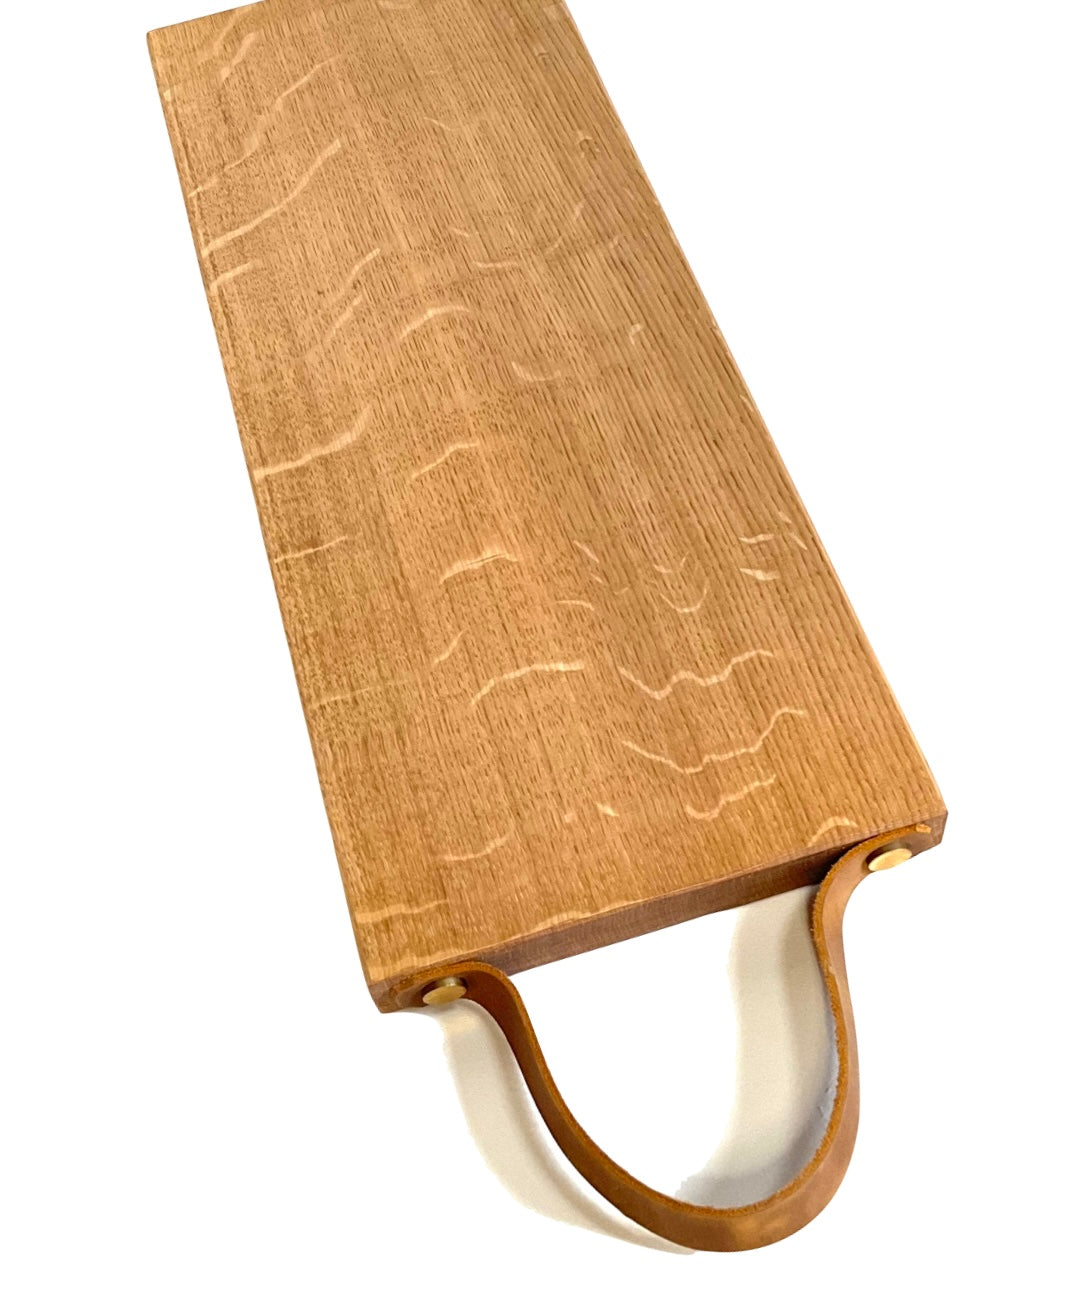 Long oak chopping / tapas board with leather strap.